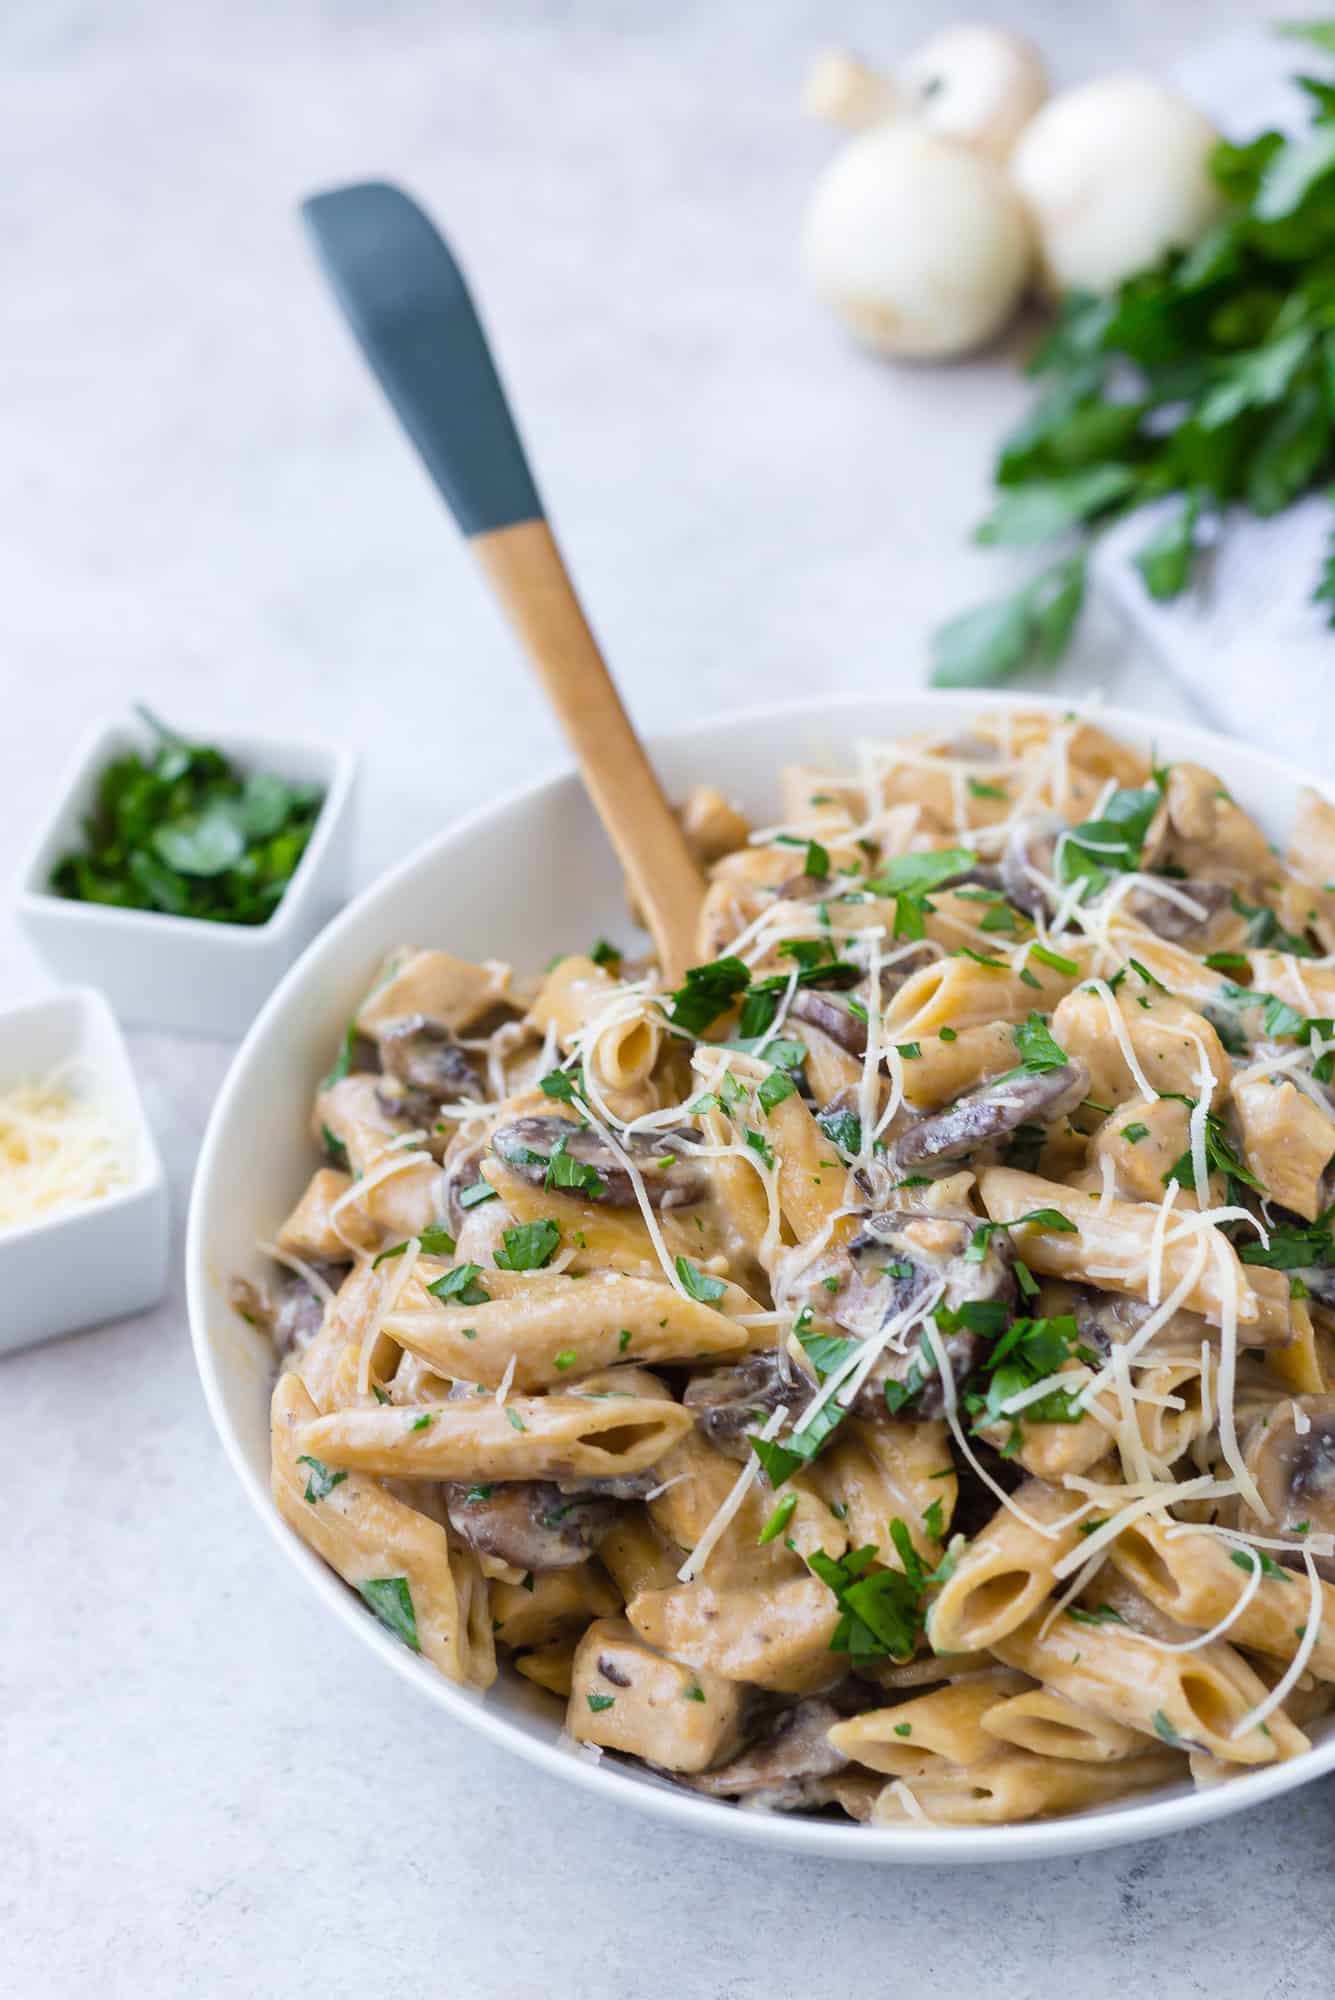 Pasta with chicken and mushrooms in a large white serving bowl.